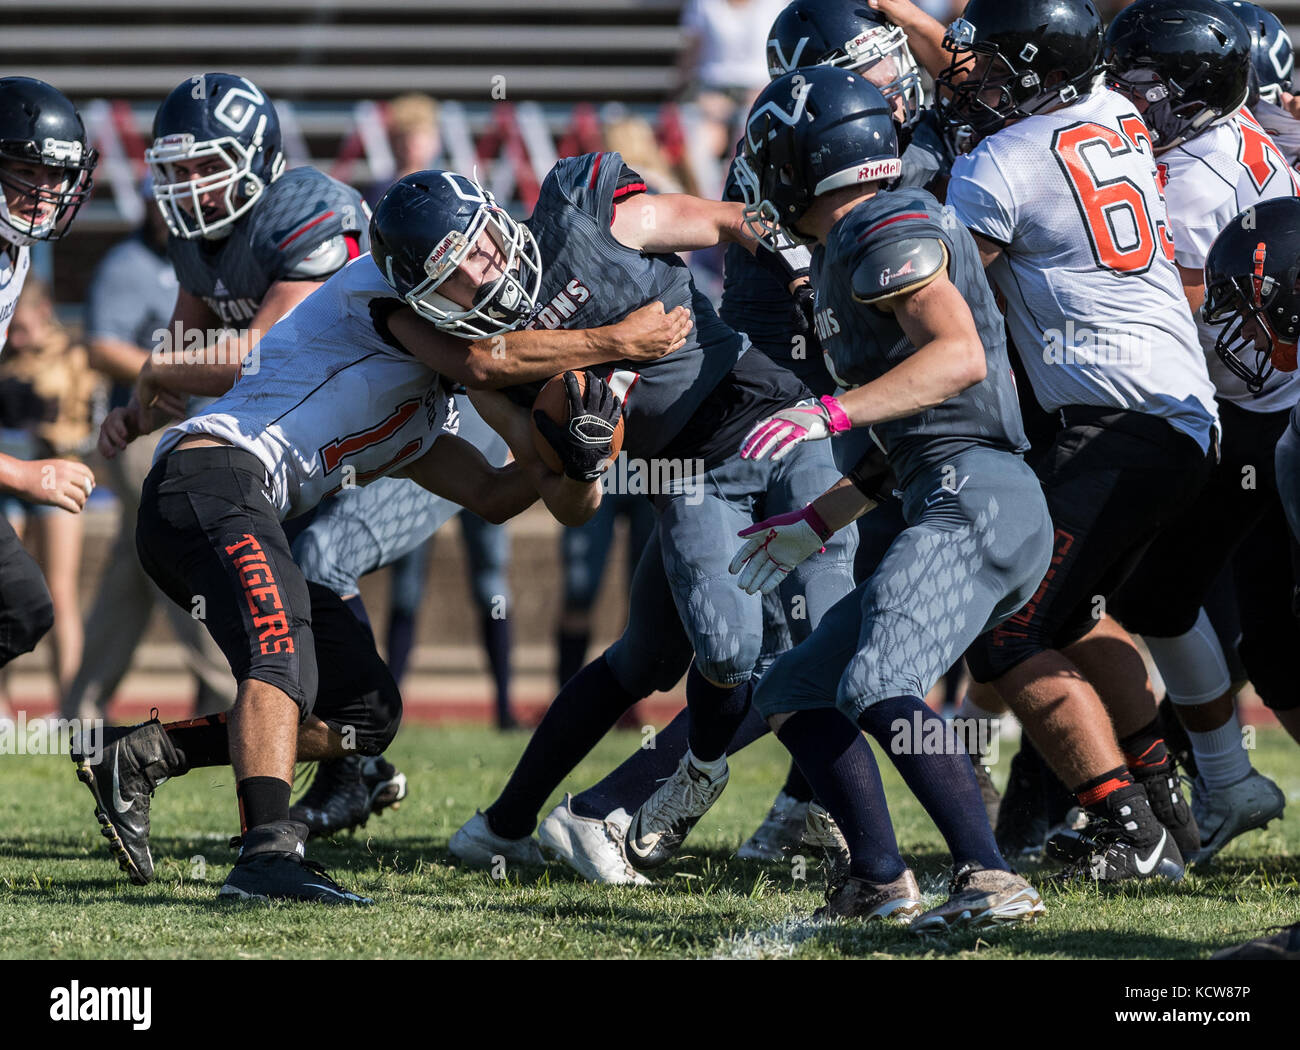 Football action with Arcata vs. Central Valley High School in  City of Shasta Lake, California. Stock Photo